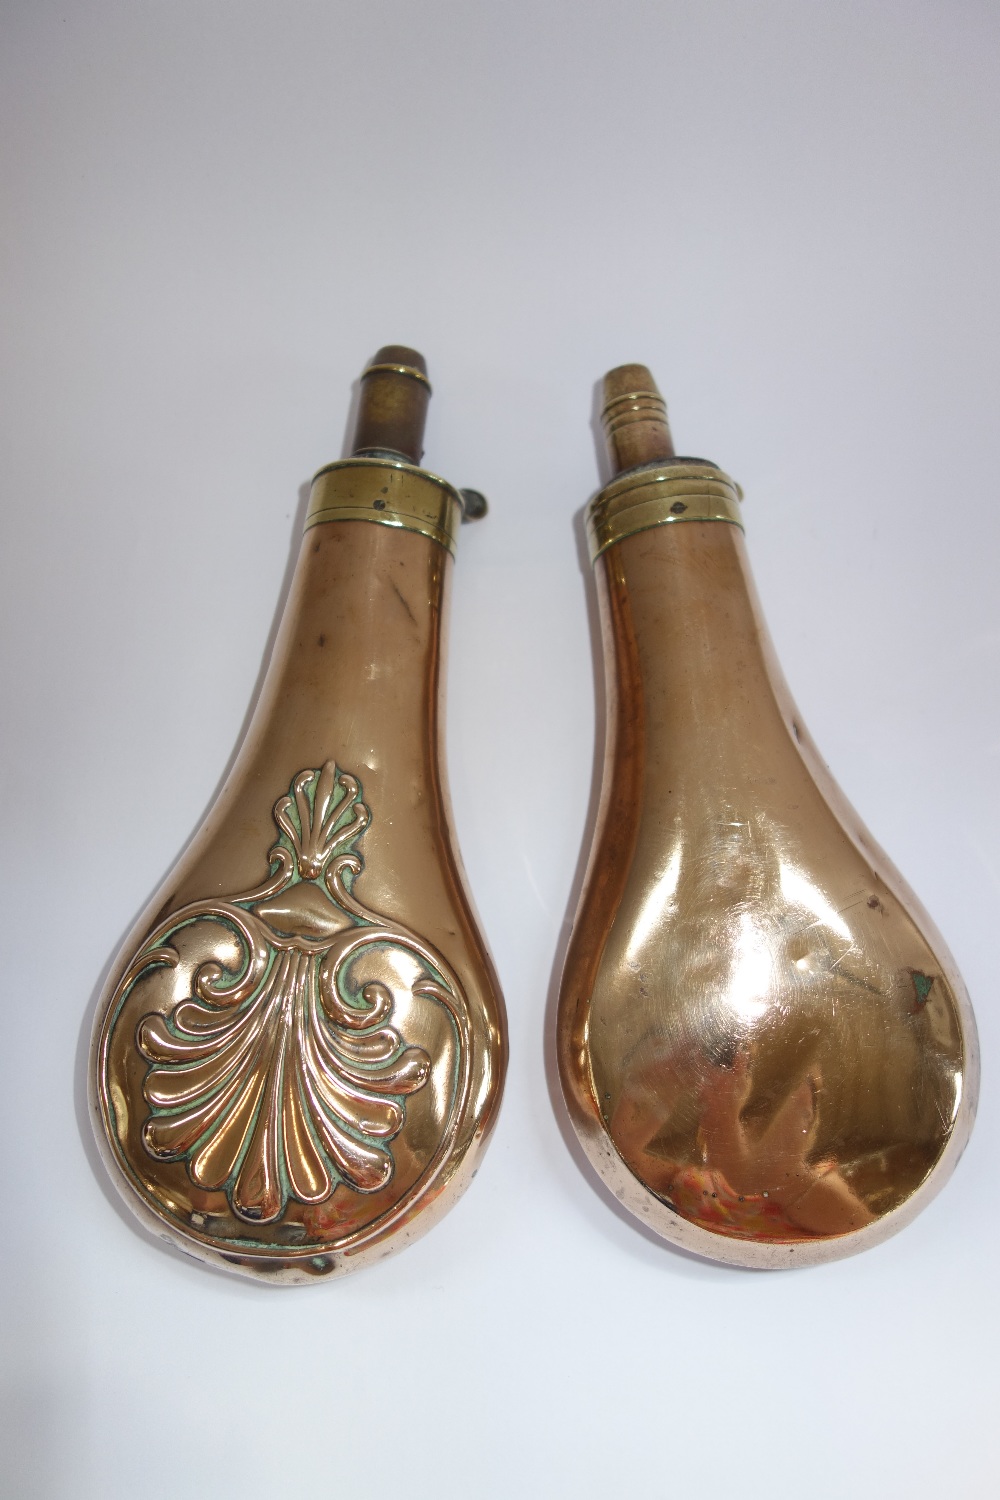 TWO COPPER AND BRASS POWDER FLASKS